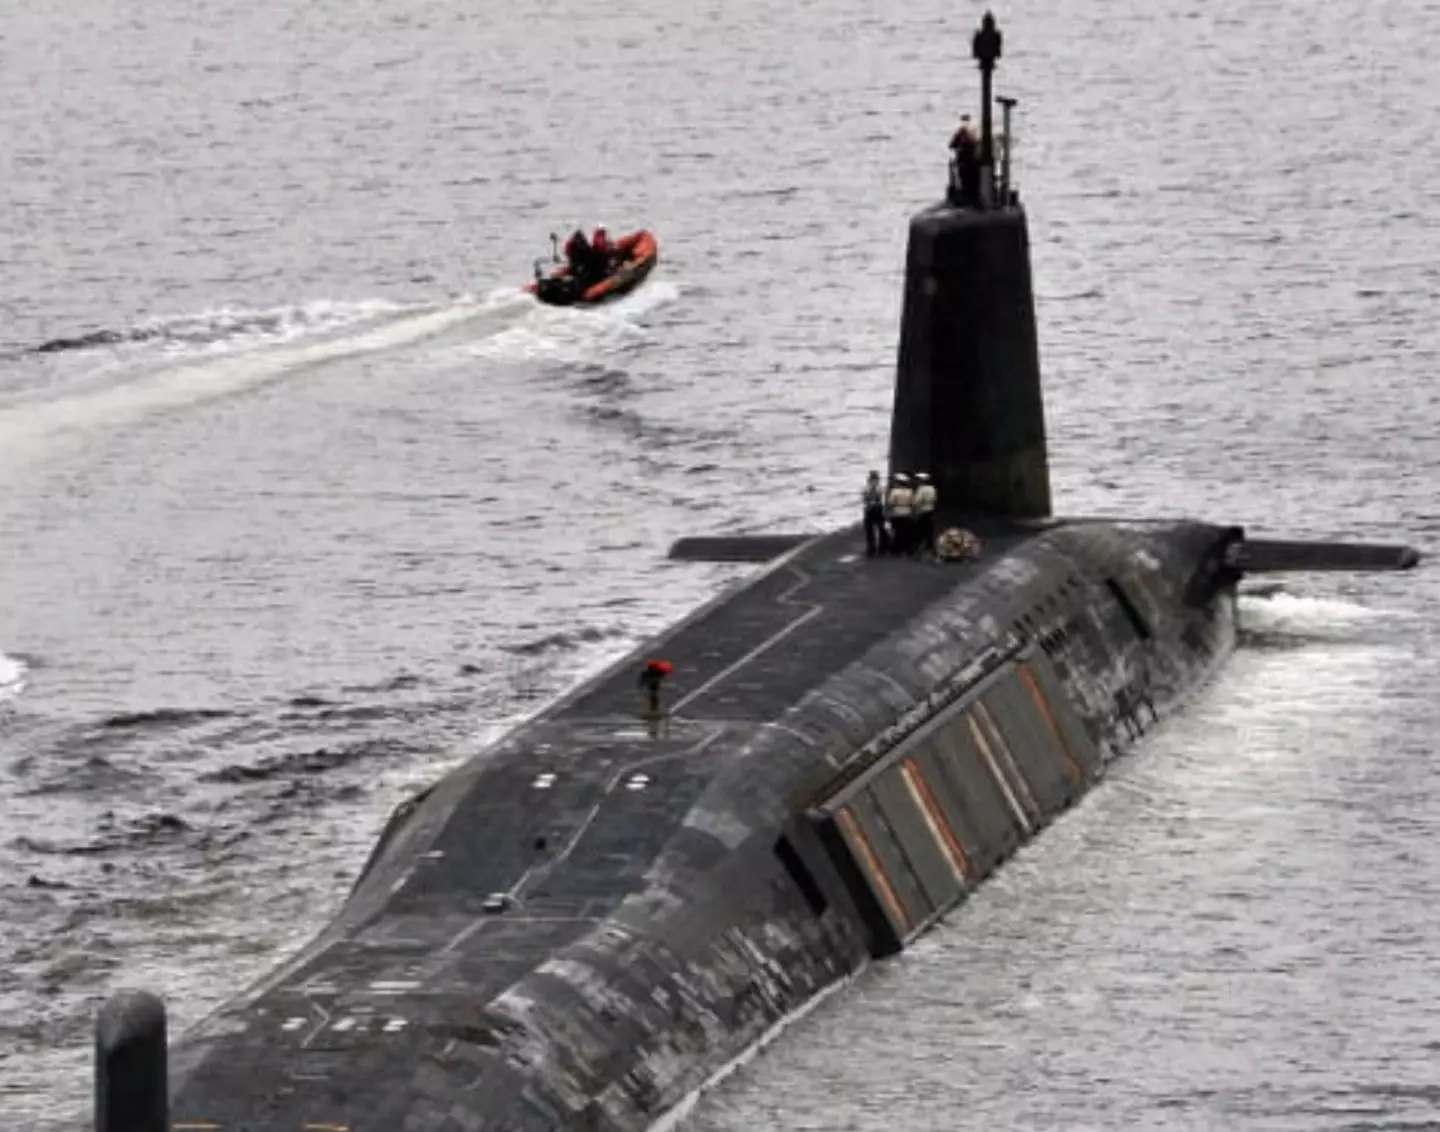 HMS Vanguard is one of four submarines the Royal Navy has in the fleet which act as a nuclear deterrent.